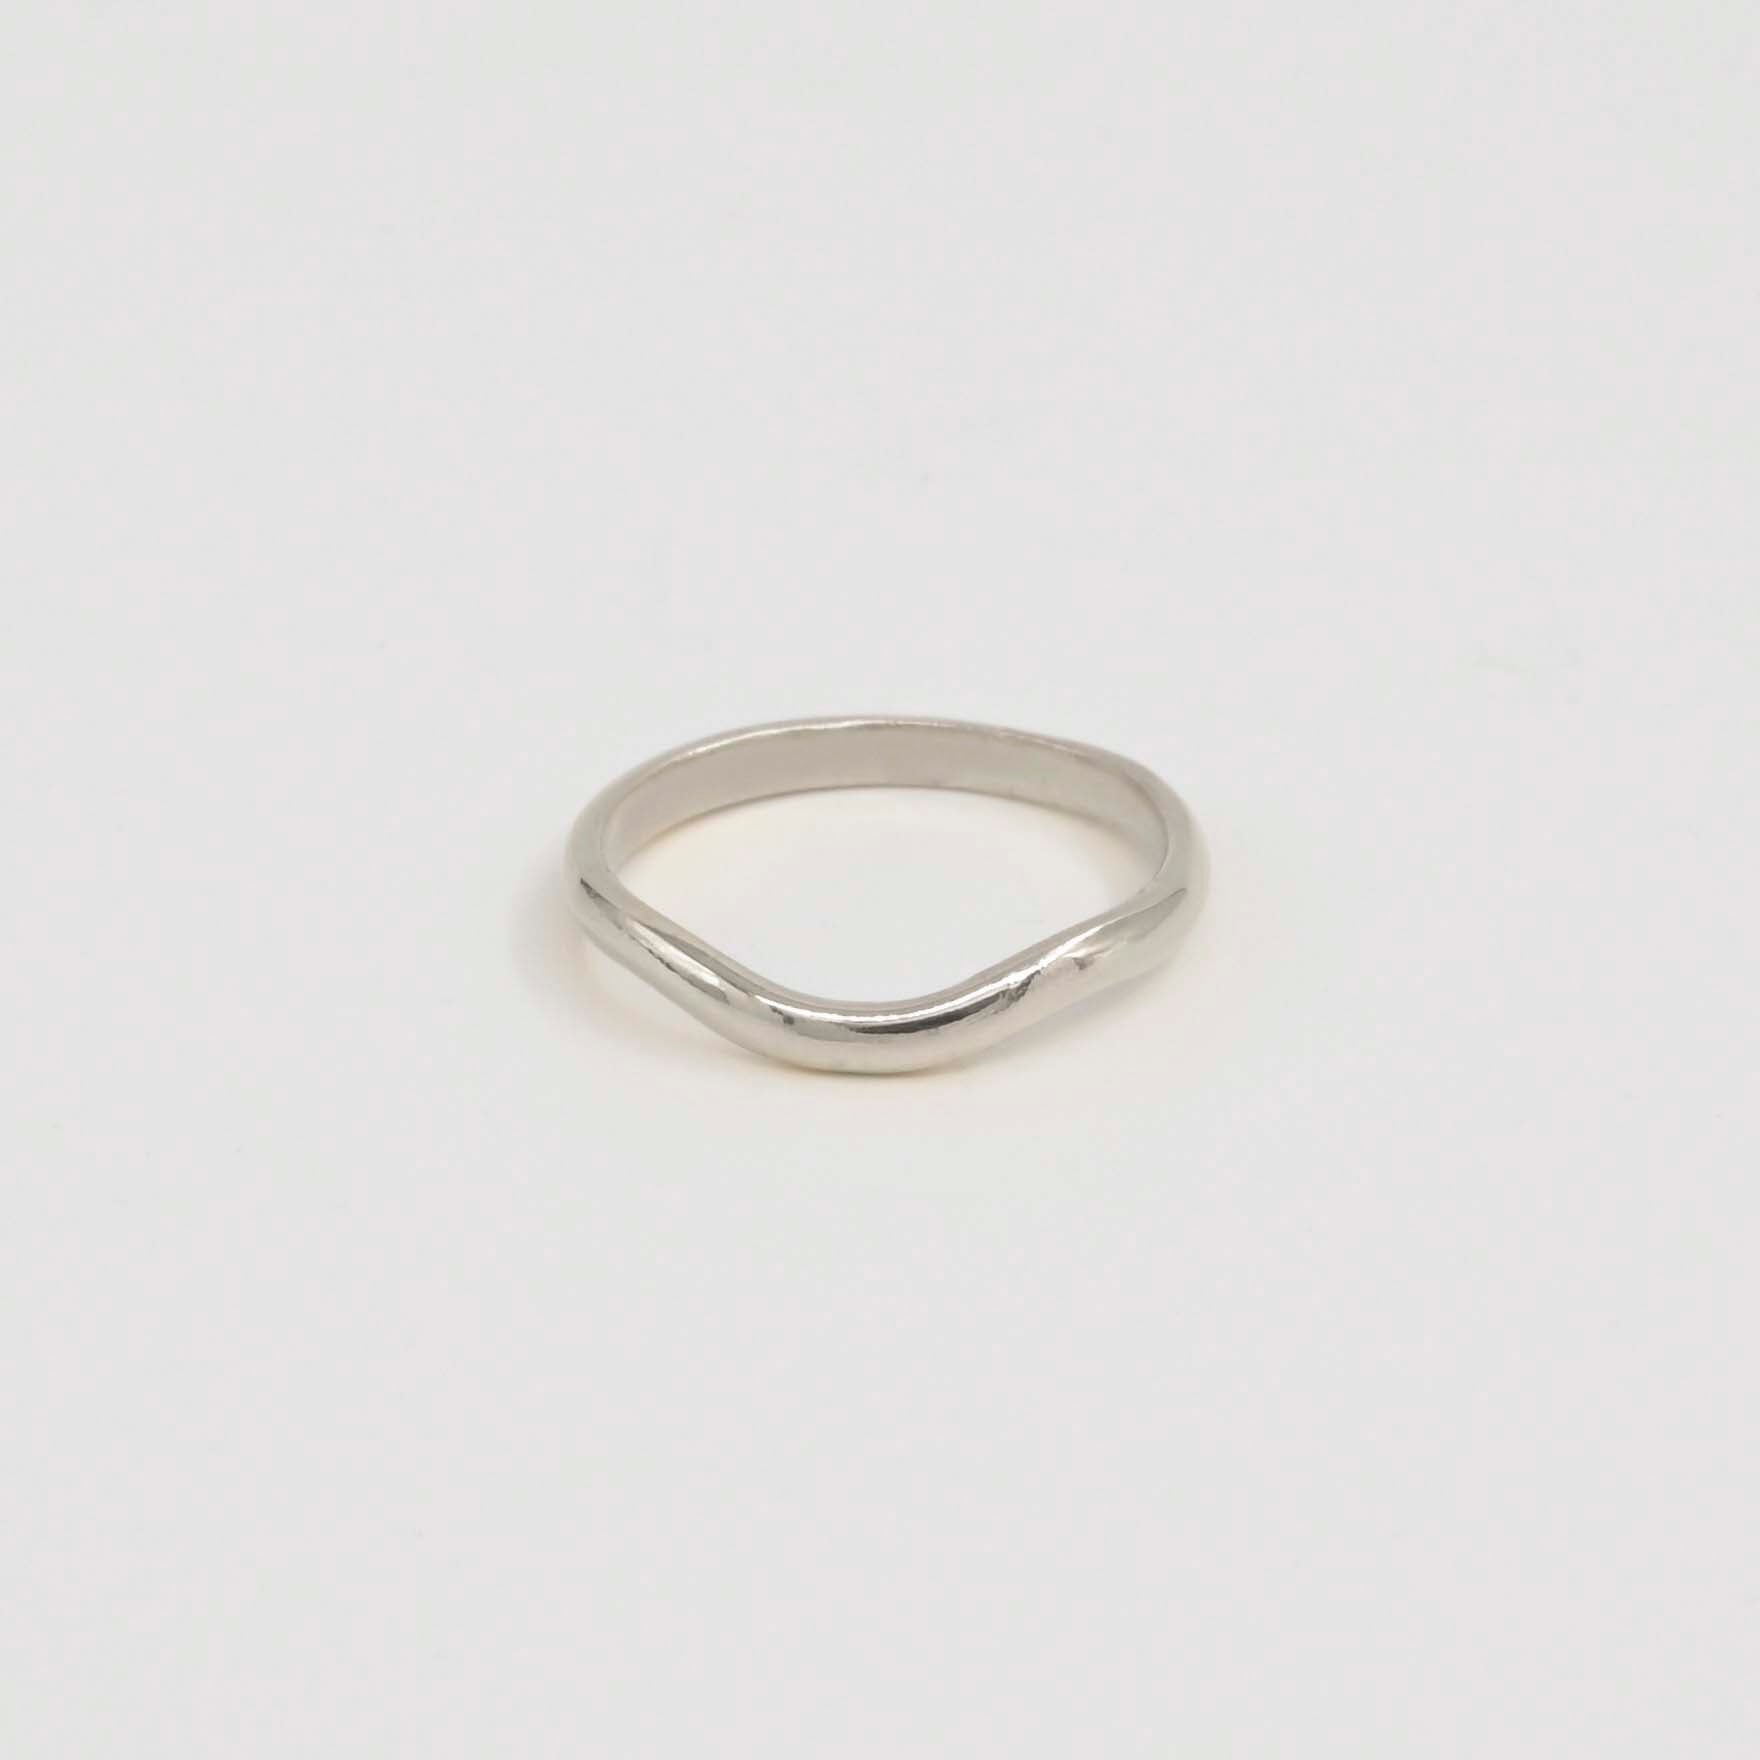 9ct White Gold Curved Nesting Wedding Ring